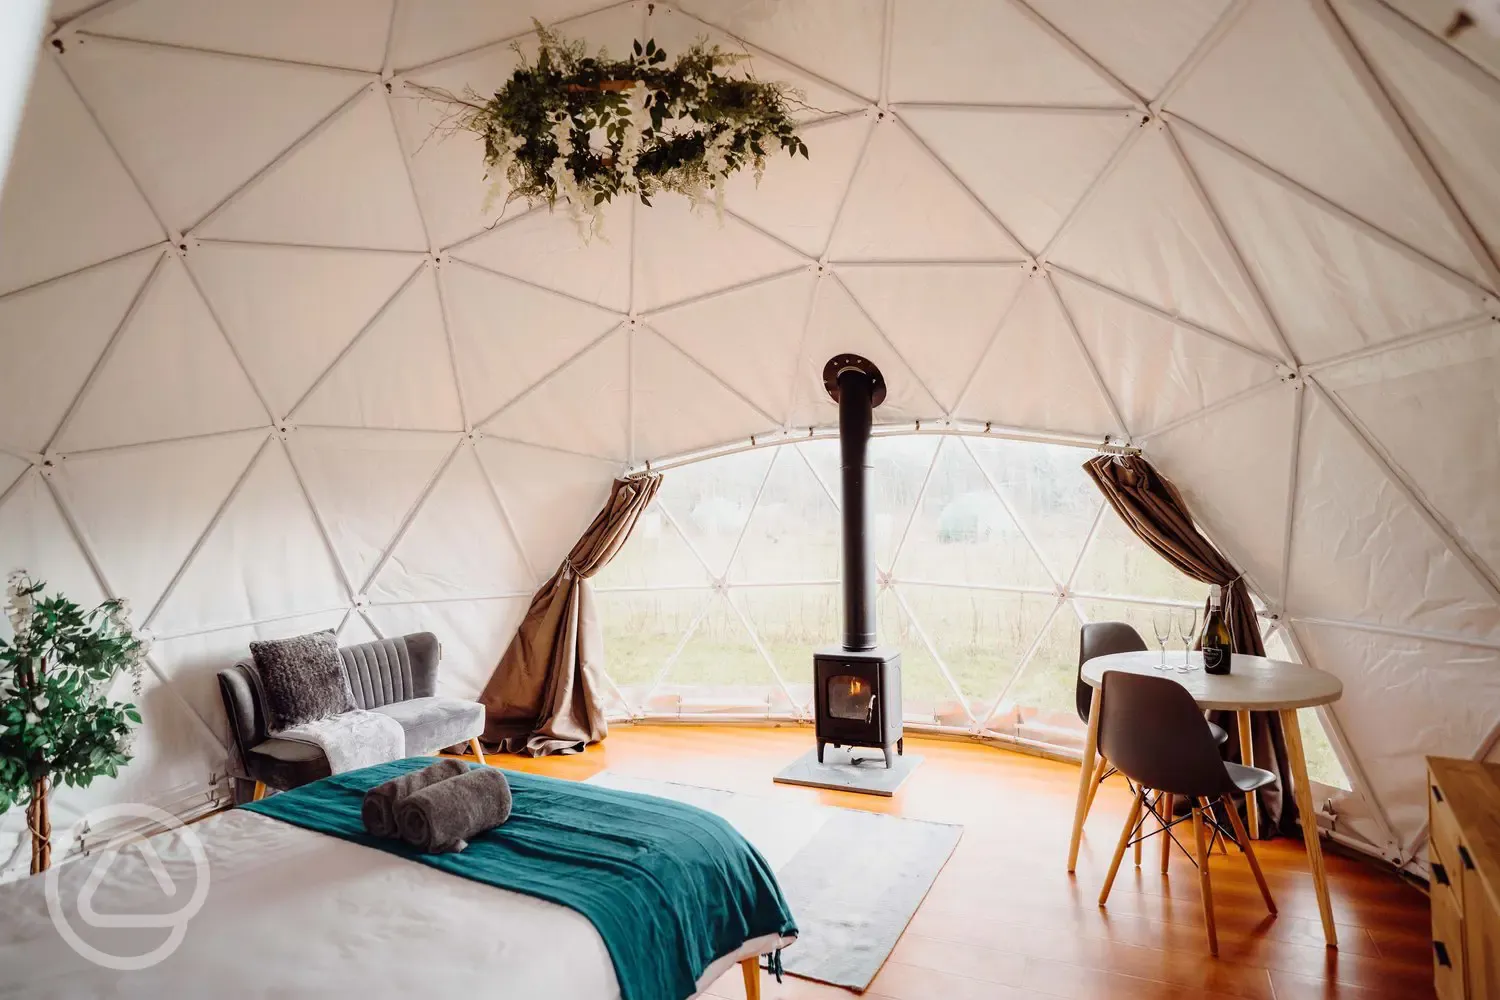 Cosy dome living space